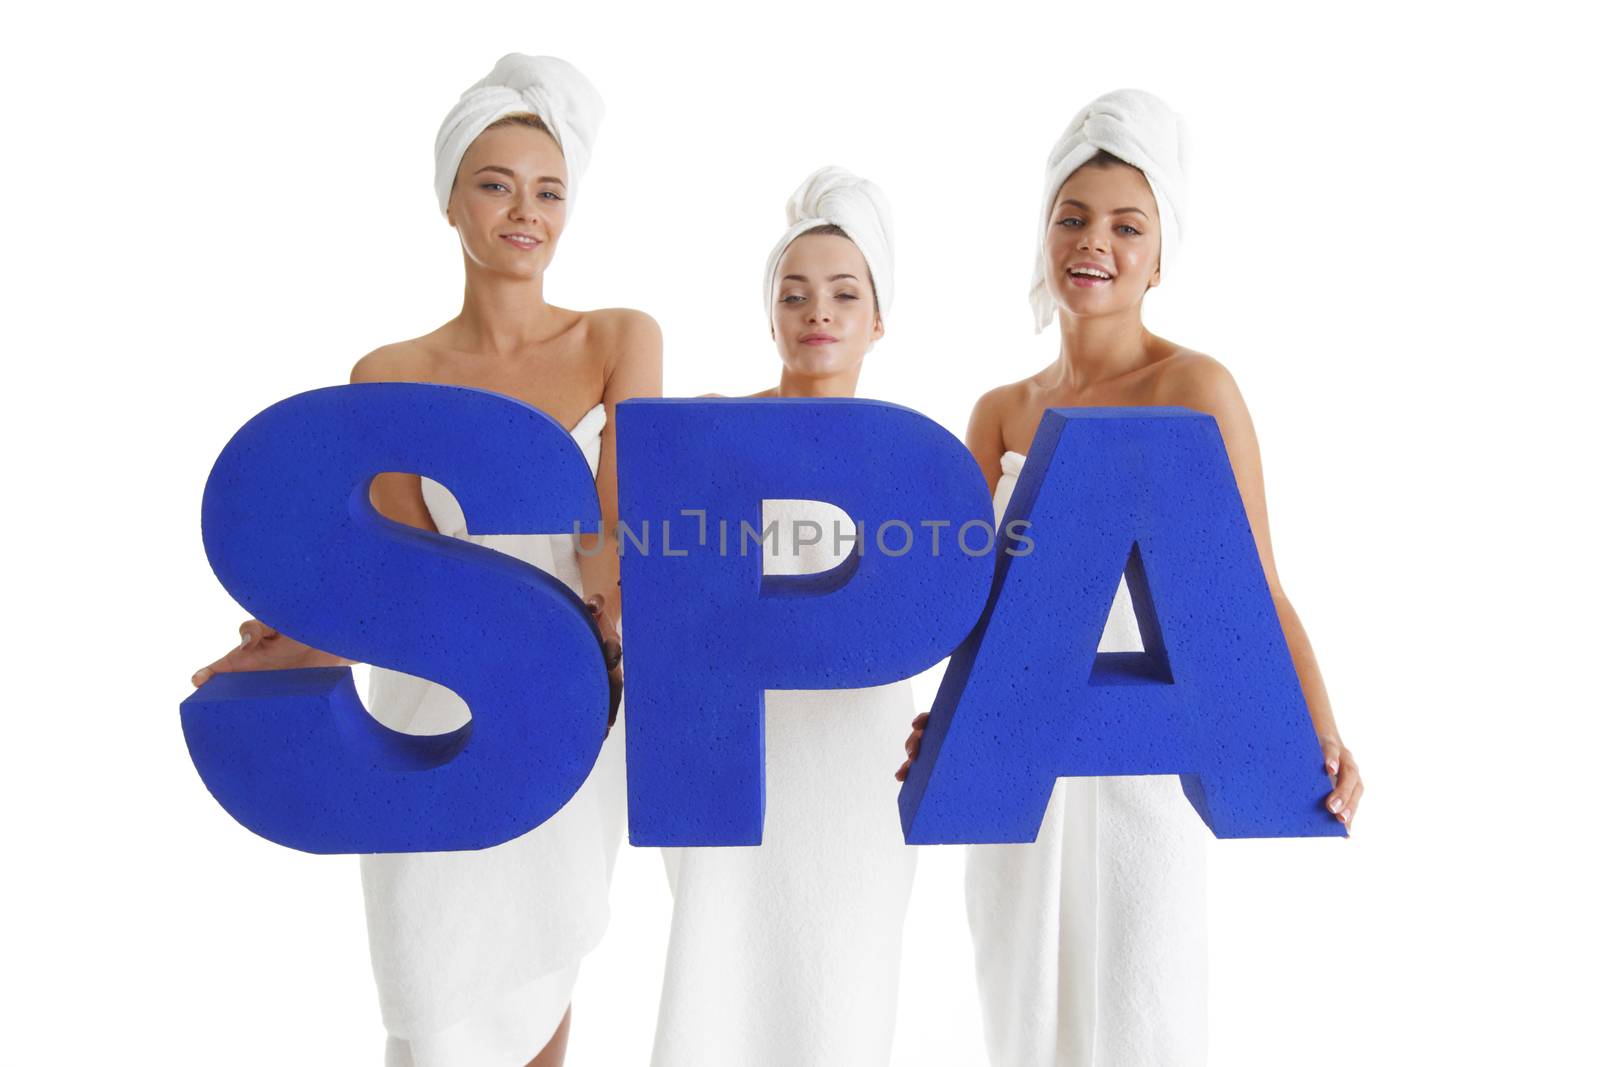 Women wrapped in towels holdin SPA letters isolated on white background